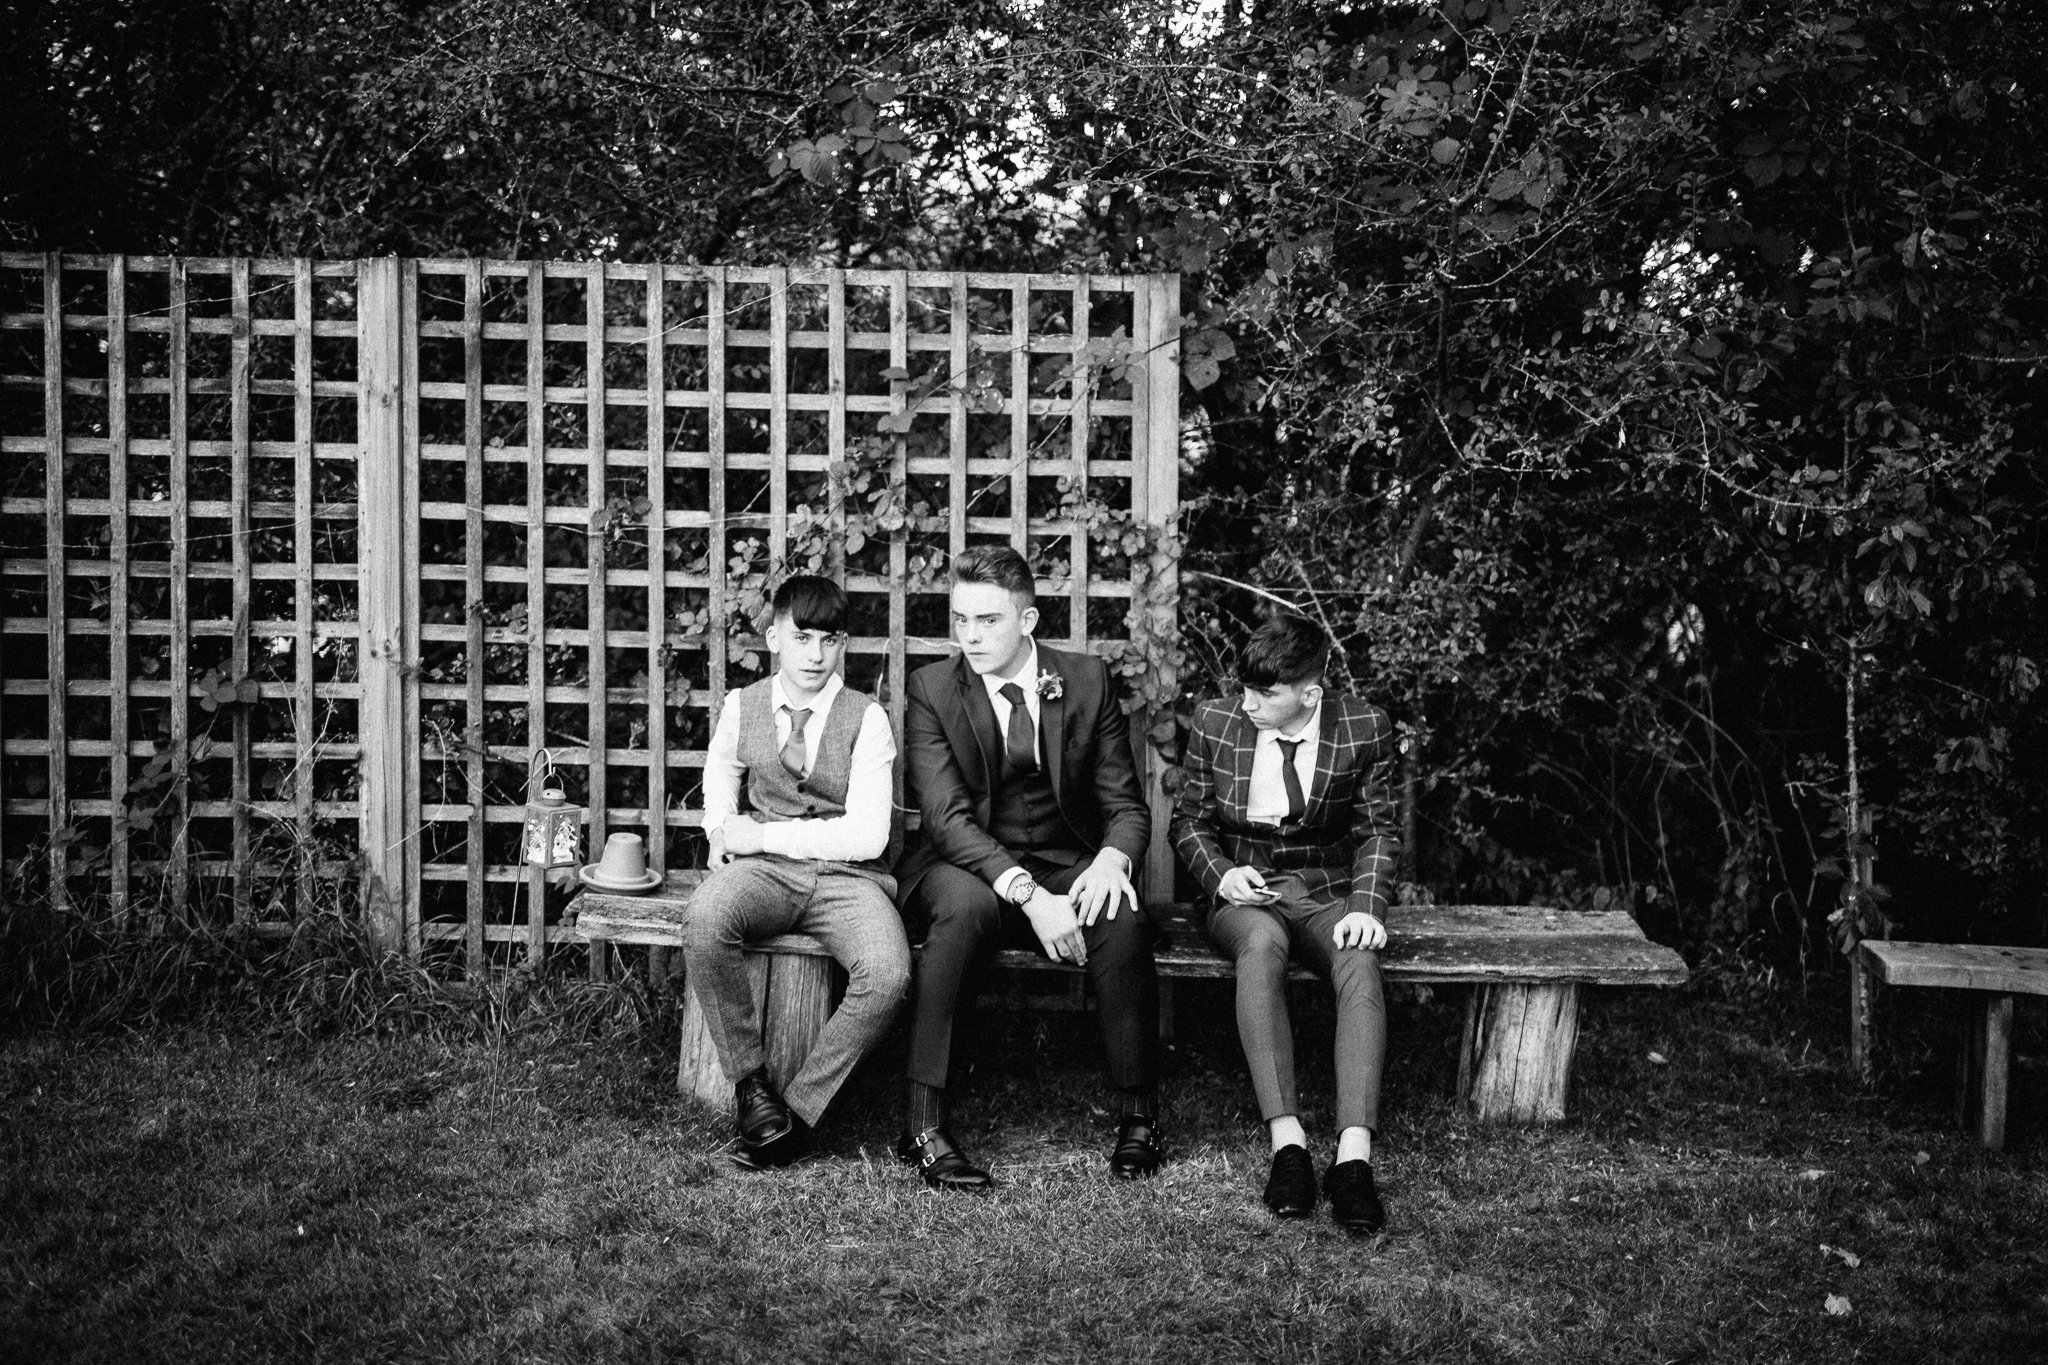  Young men sitting on a bench at Gildings Barns in Newdigate Surrey 